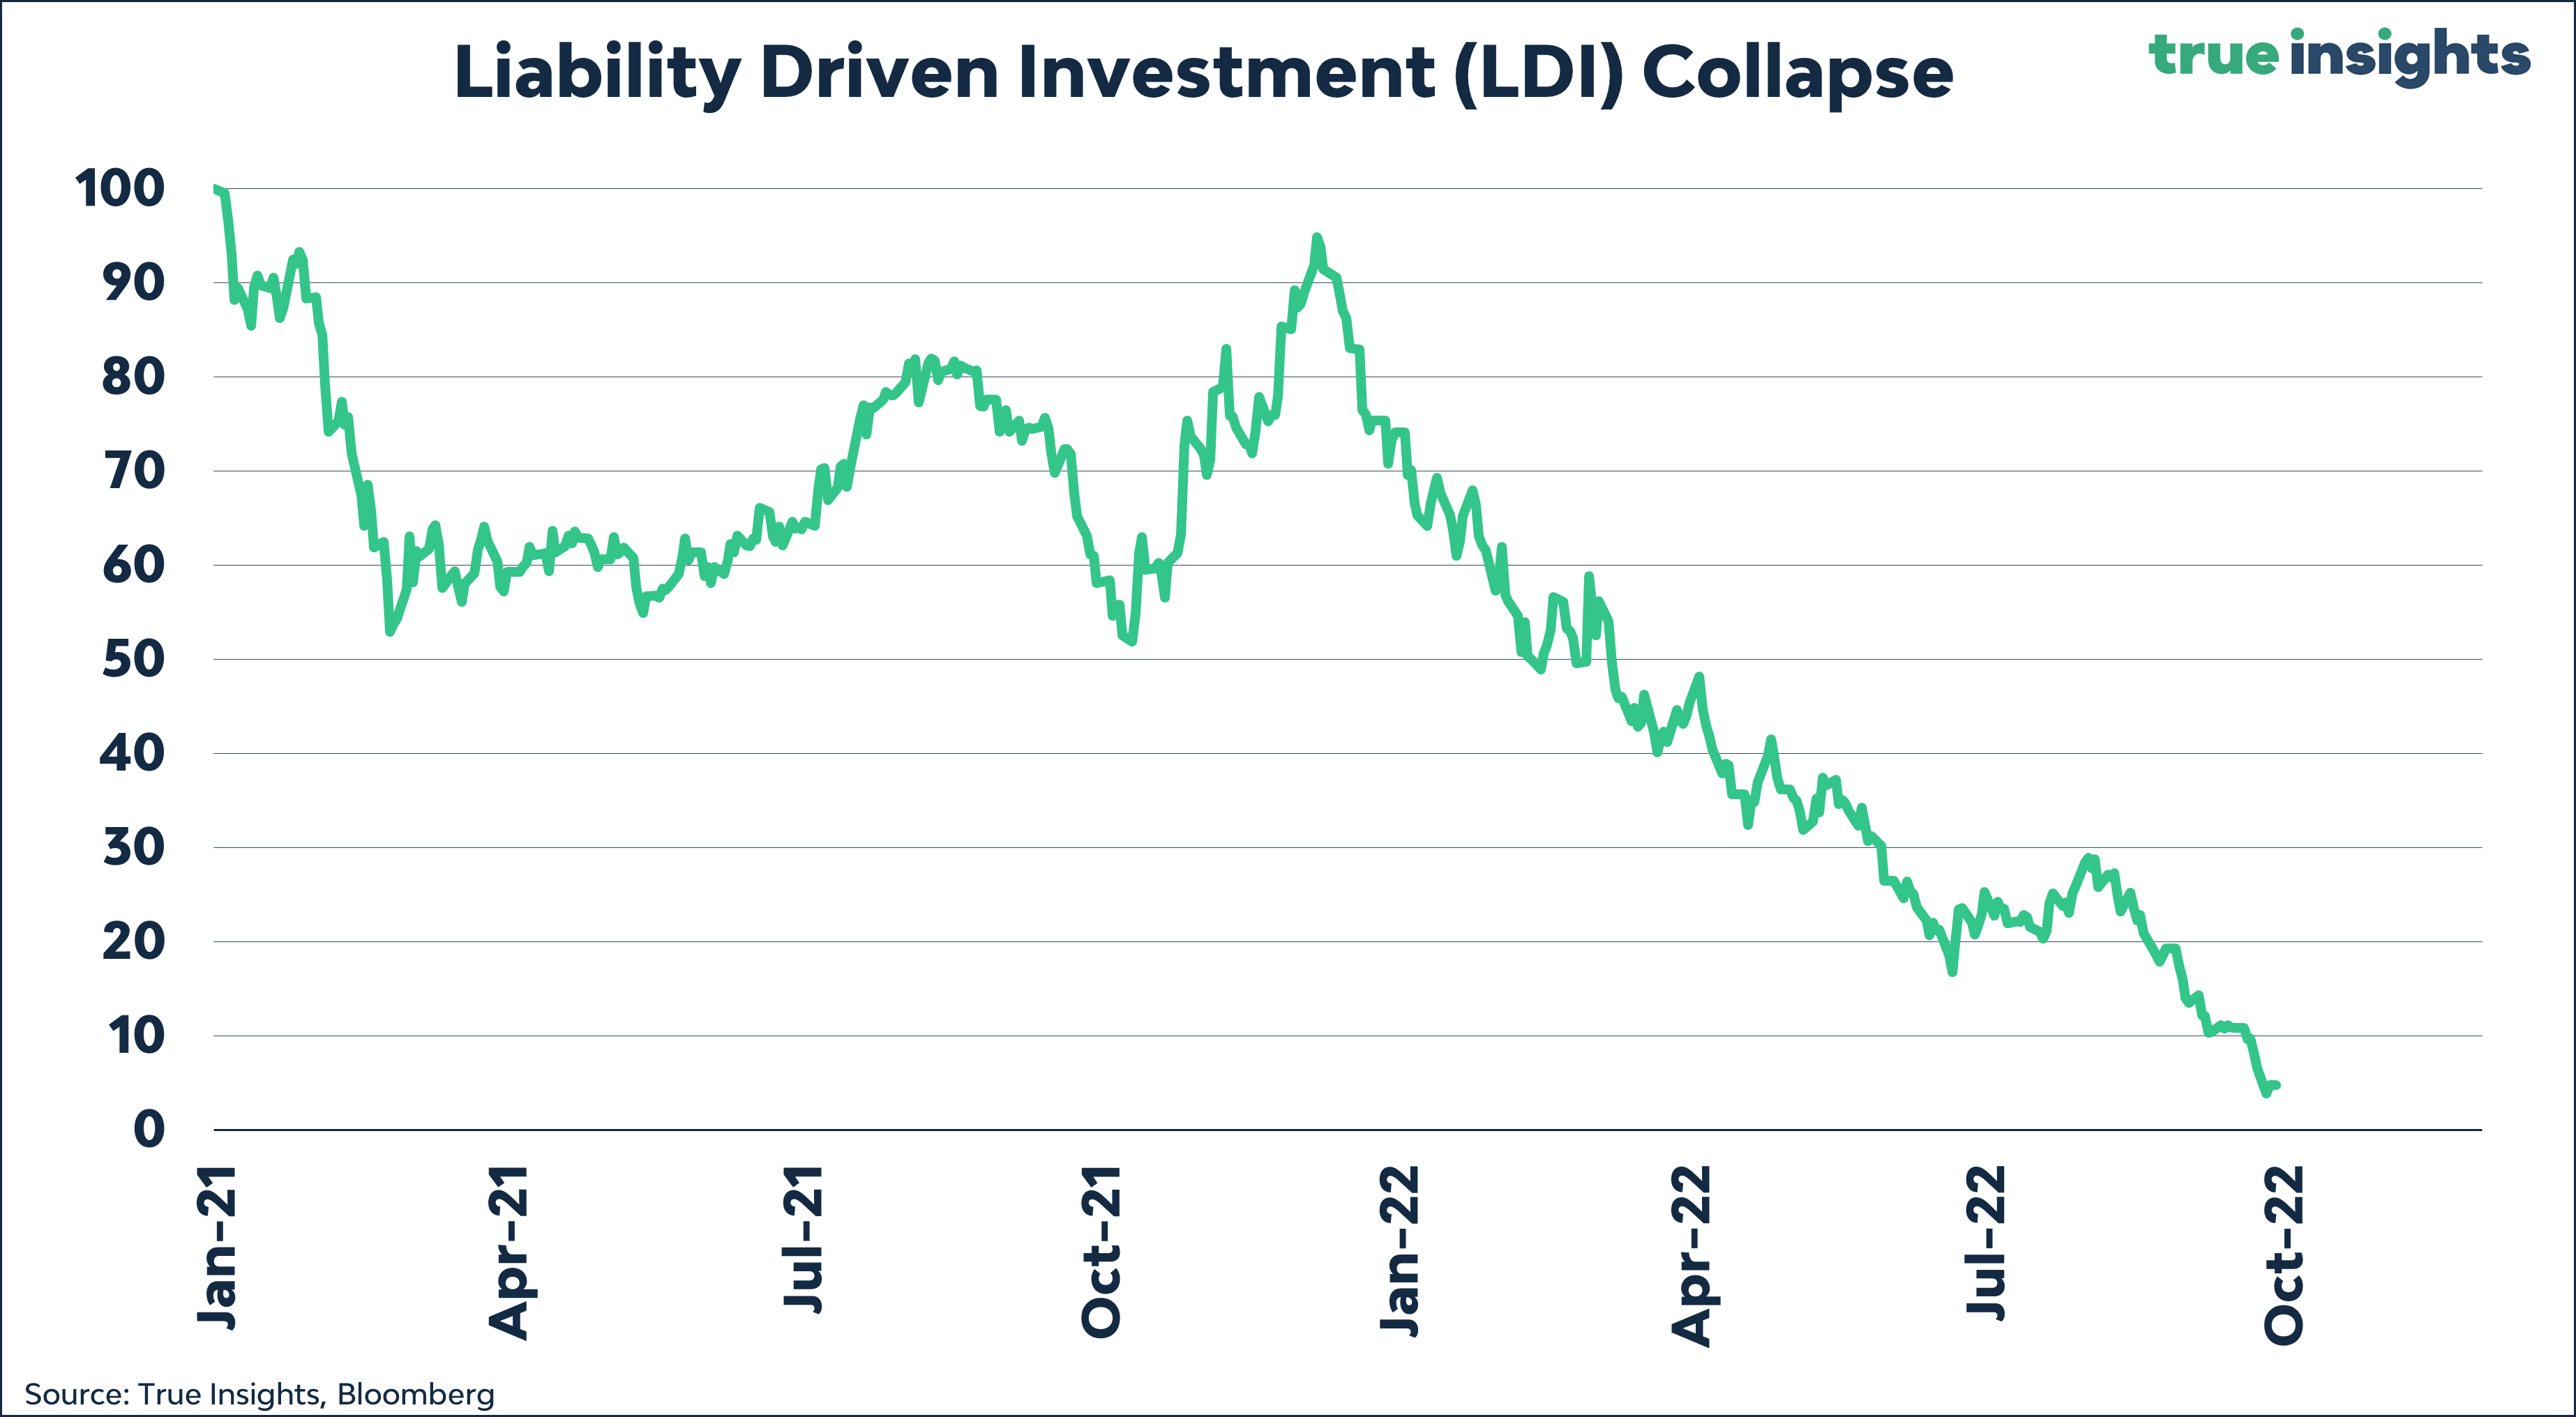 LONGWave-10-11-22-OCTOBER-Bear-Markets-Die-in-October-Newsletter-2-Liability-Driven-Investment-LDI-1 image